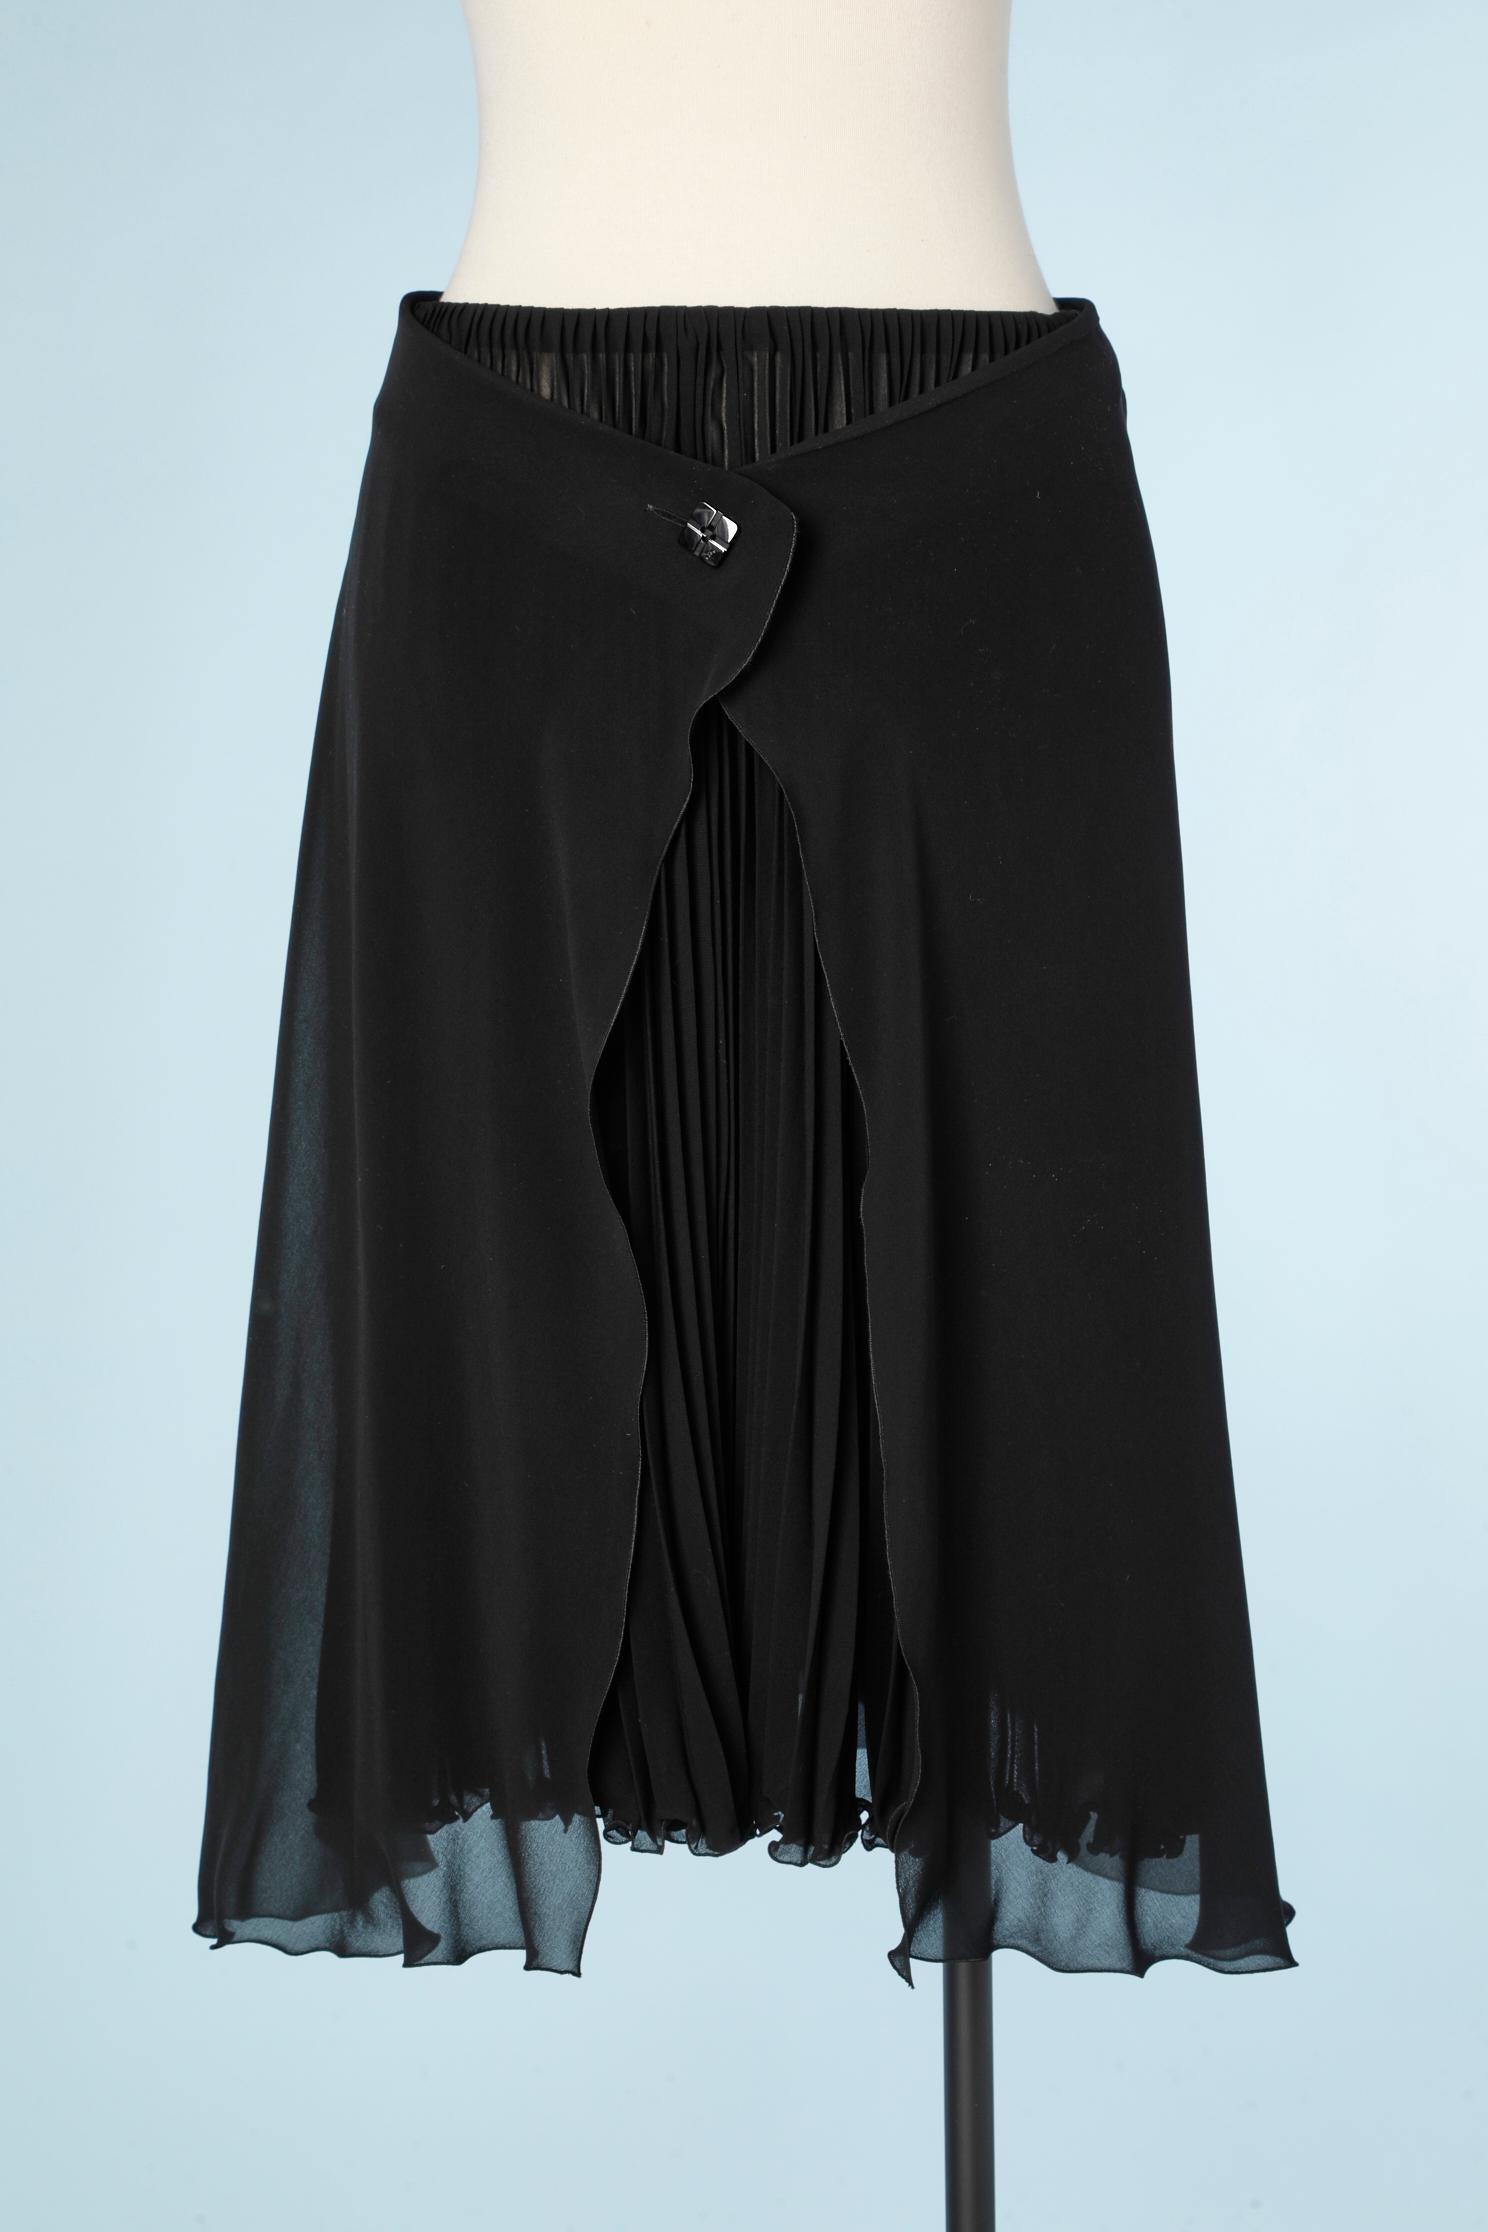 Black double lays chiffon skirt .The under lay is sunray pleated , the top skirt is button in the middle front with one branded button. 
SIZE 38 (M) 